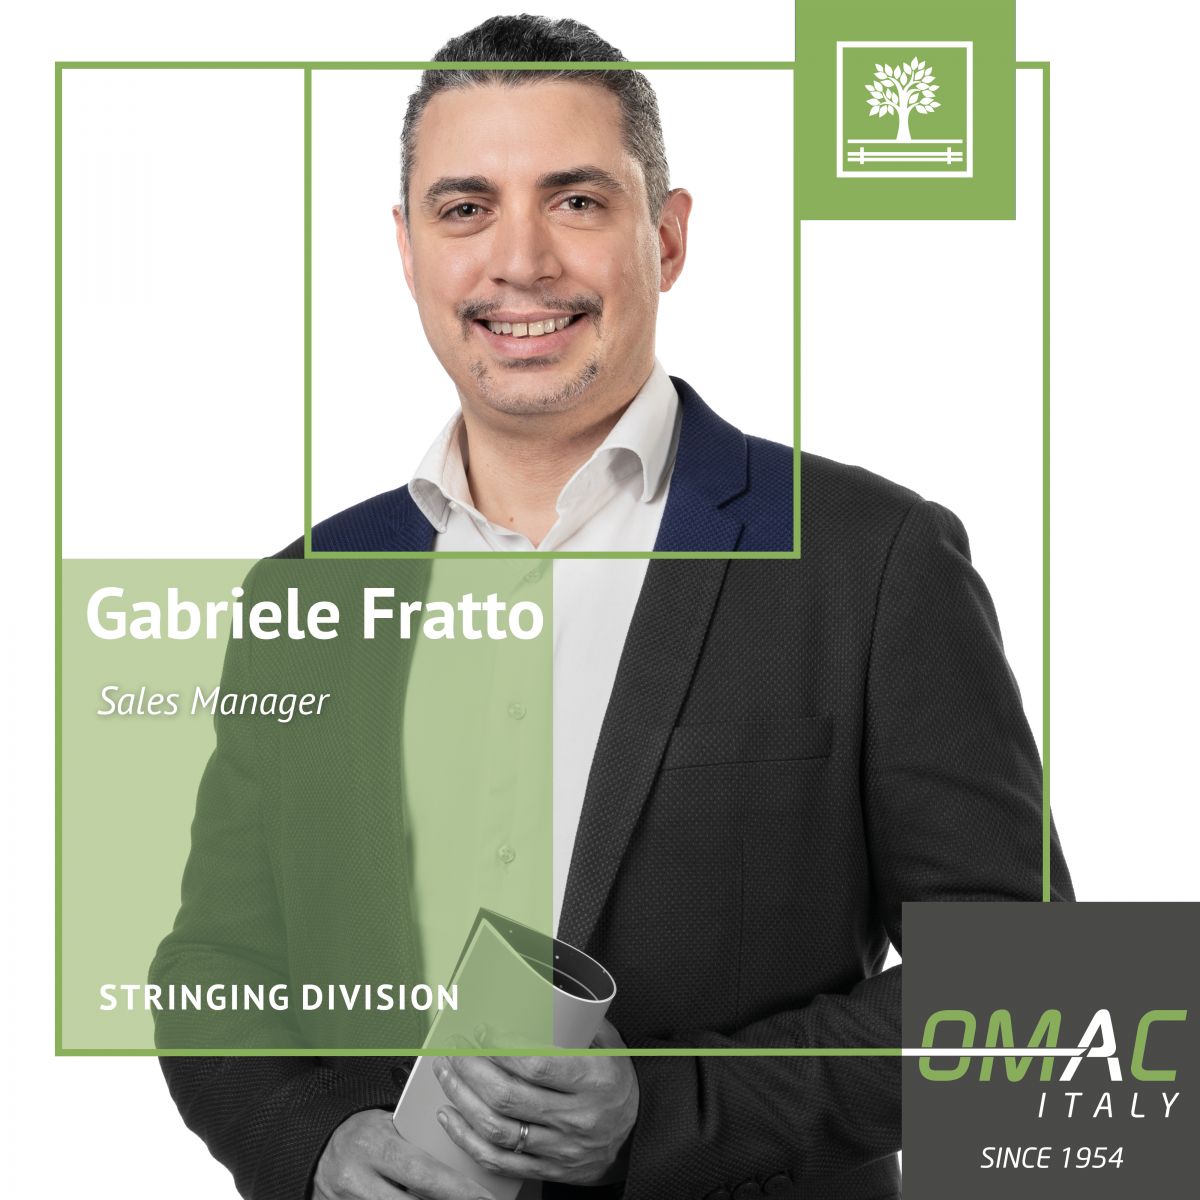 OMAC TEAM: GABRIELE FRATTO - SALES MANAGER